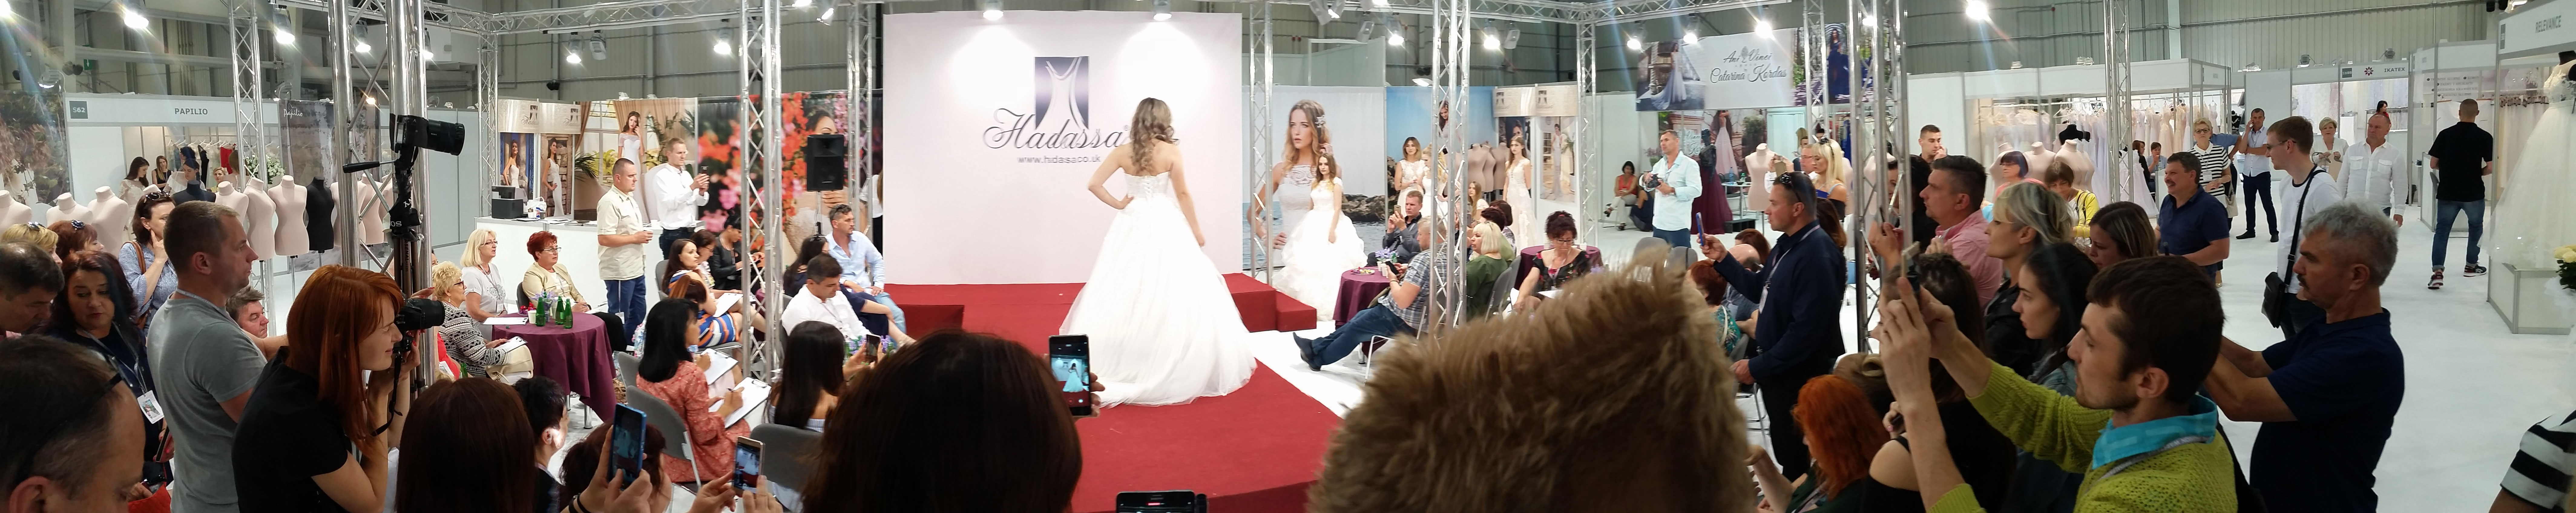 The Bridal Show 2017 in Warsaw with Hadassa